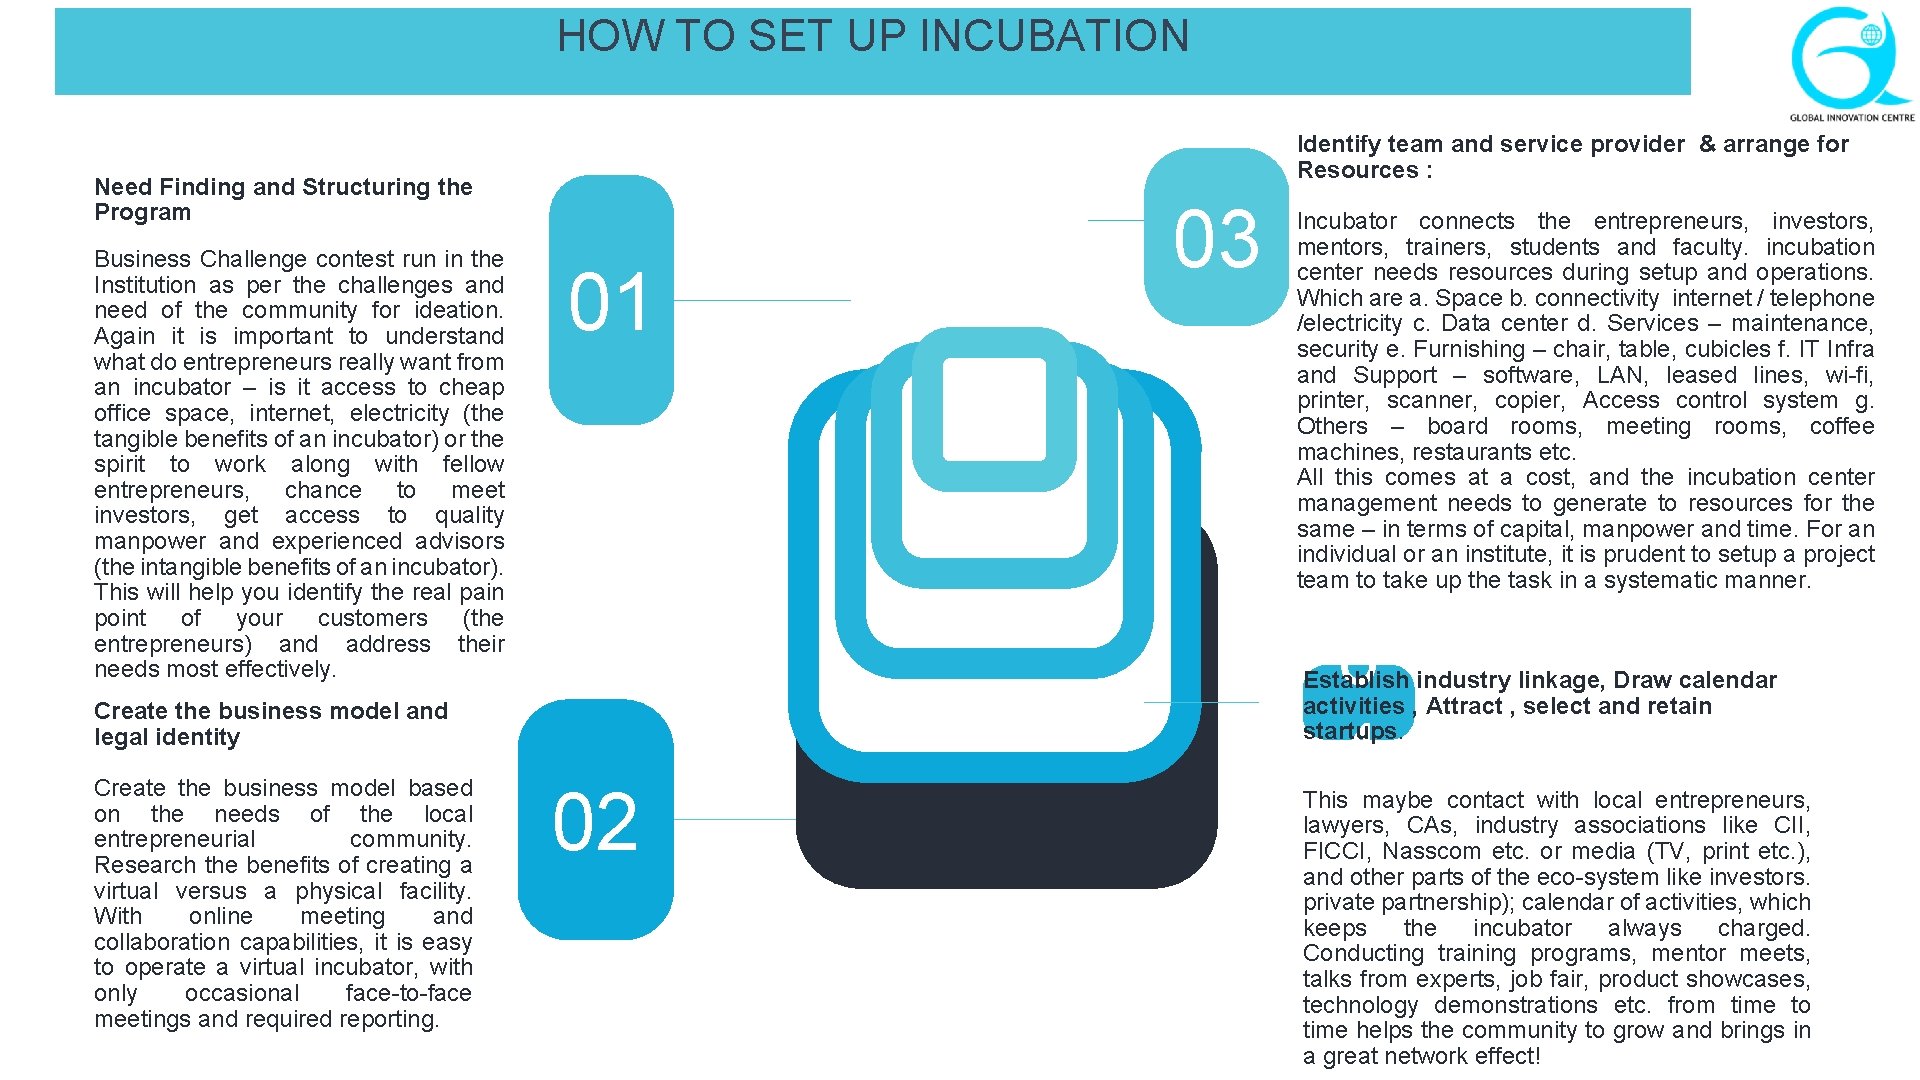 HOW TO SET UP INCUBATION Identify team and service provider & arrange for Resources